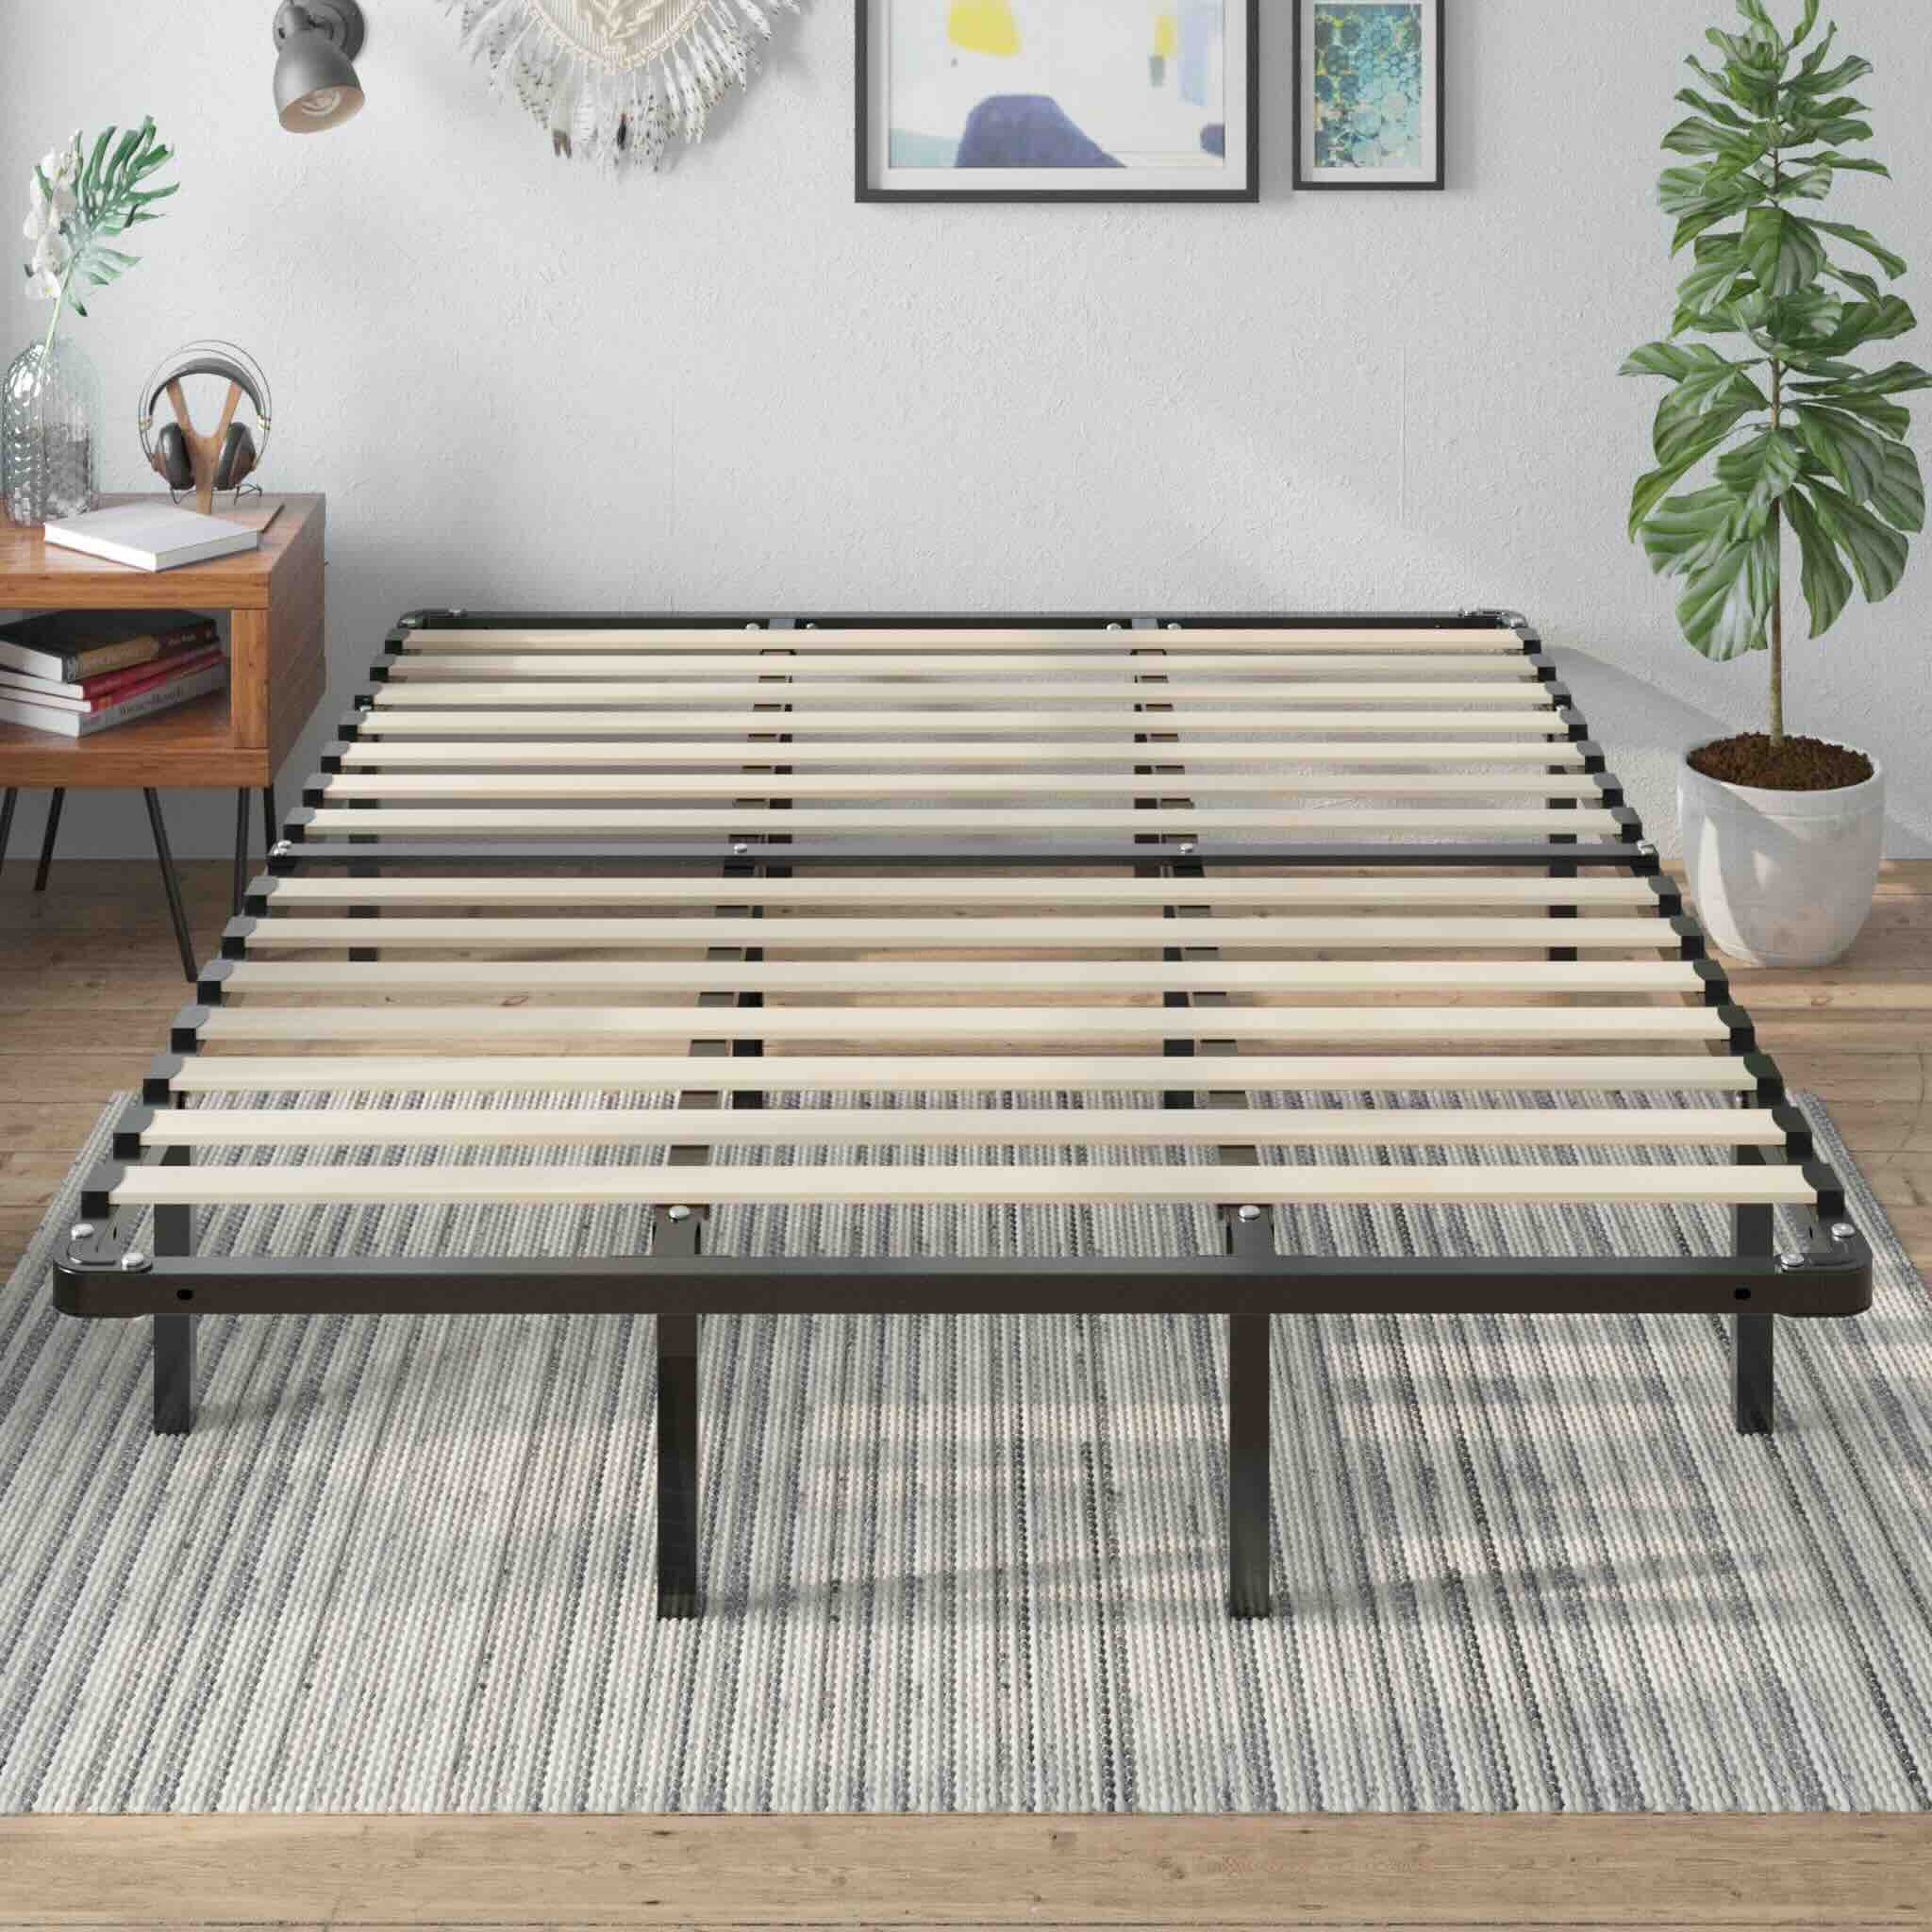 How To Disassemble A Zinus Bed Frame